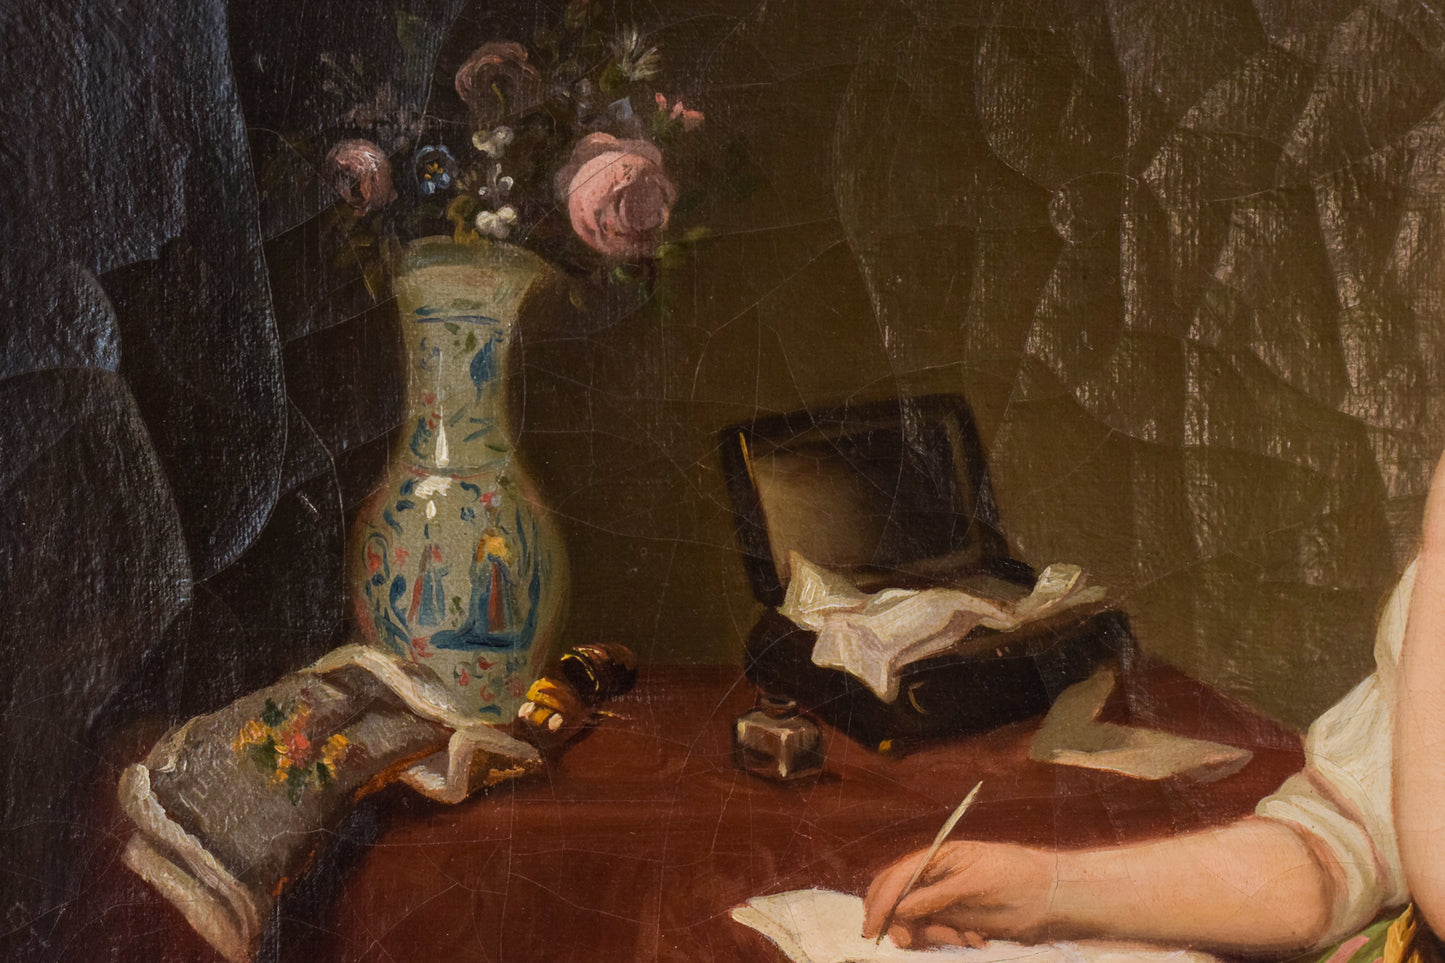 Girl Writing a Letter - Oil on Canvas